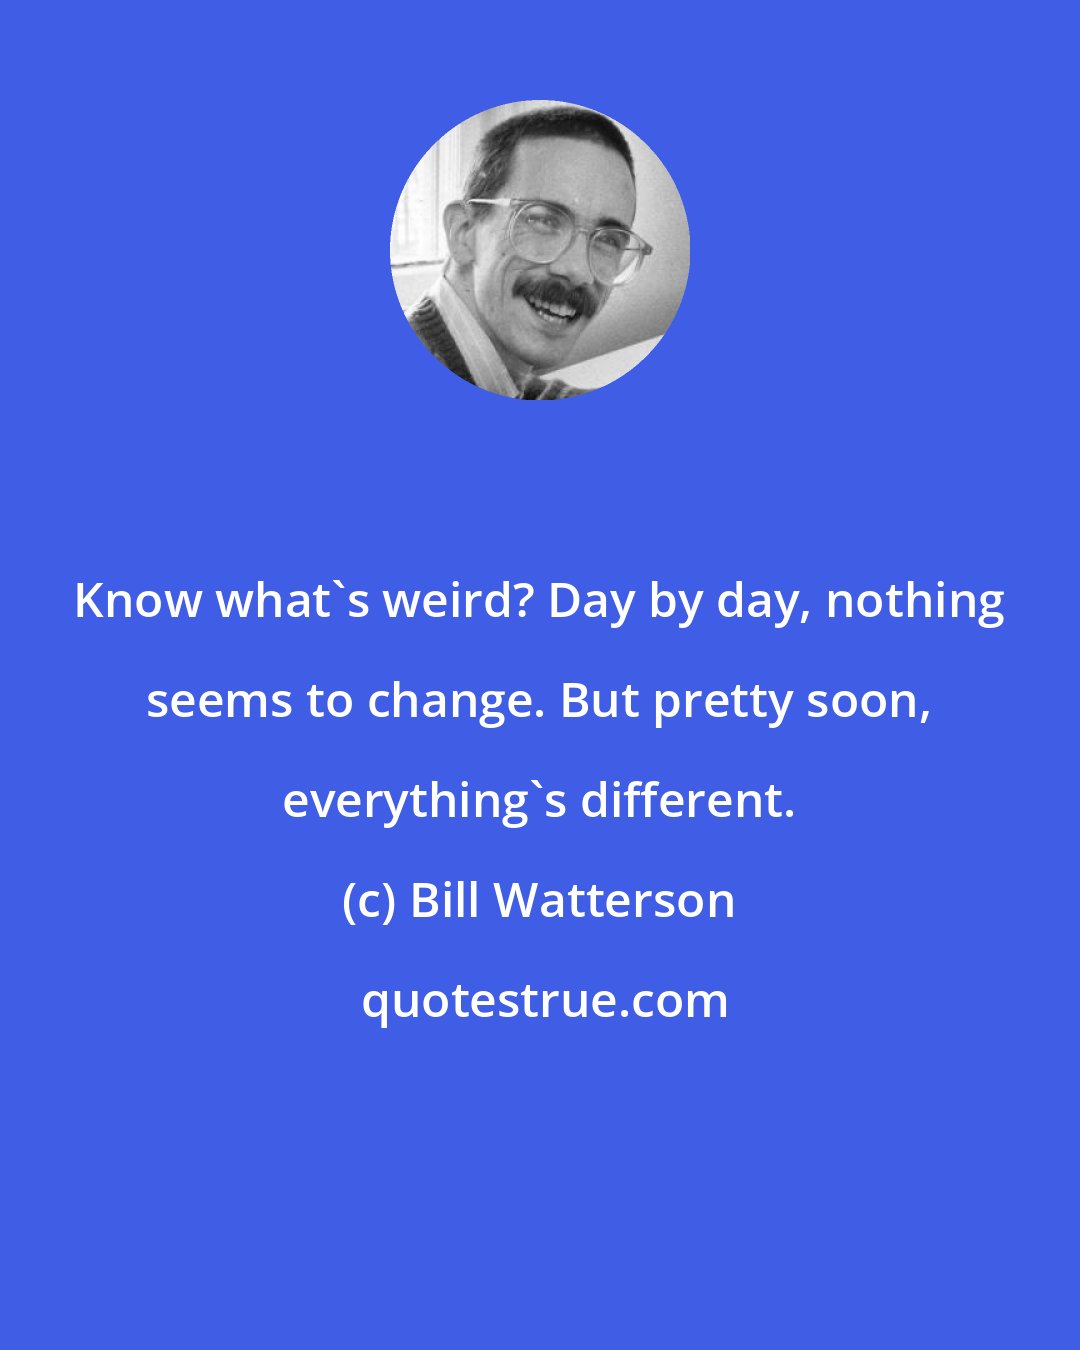 Bill Watterson: Know what's weird? Day by day, nothing seems to change. But pretty soon, everything's different.